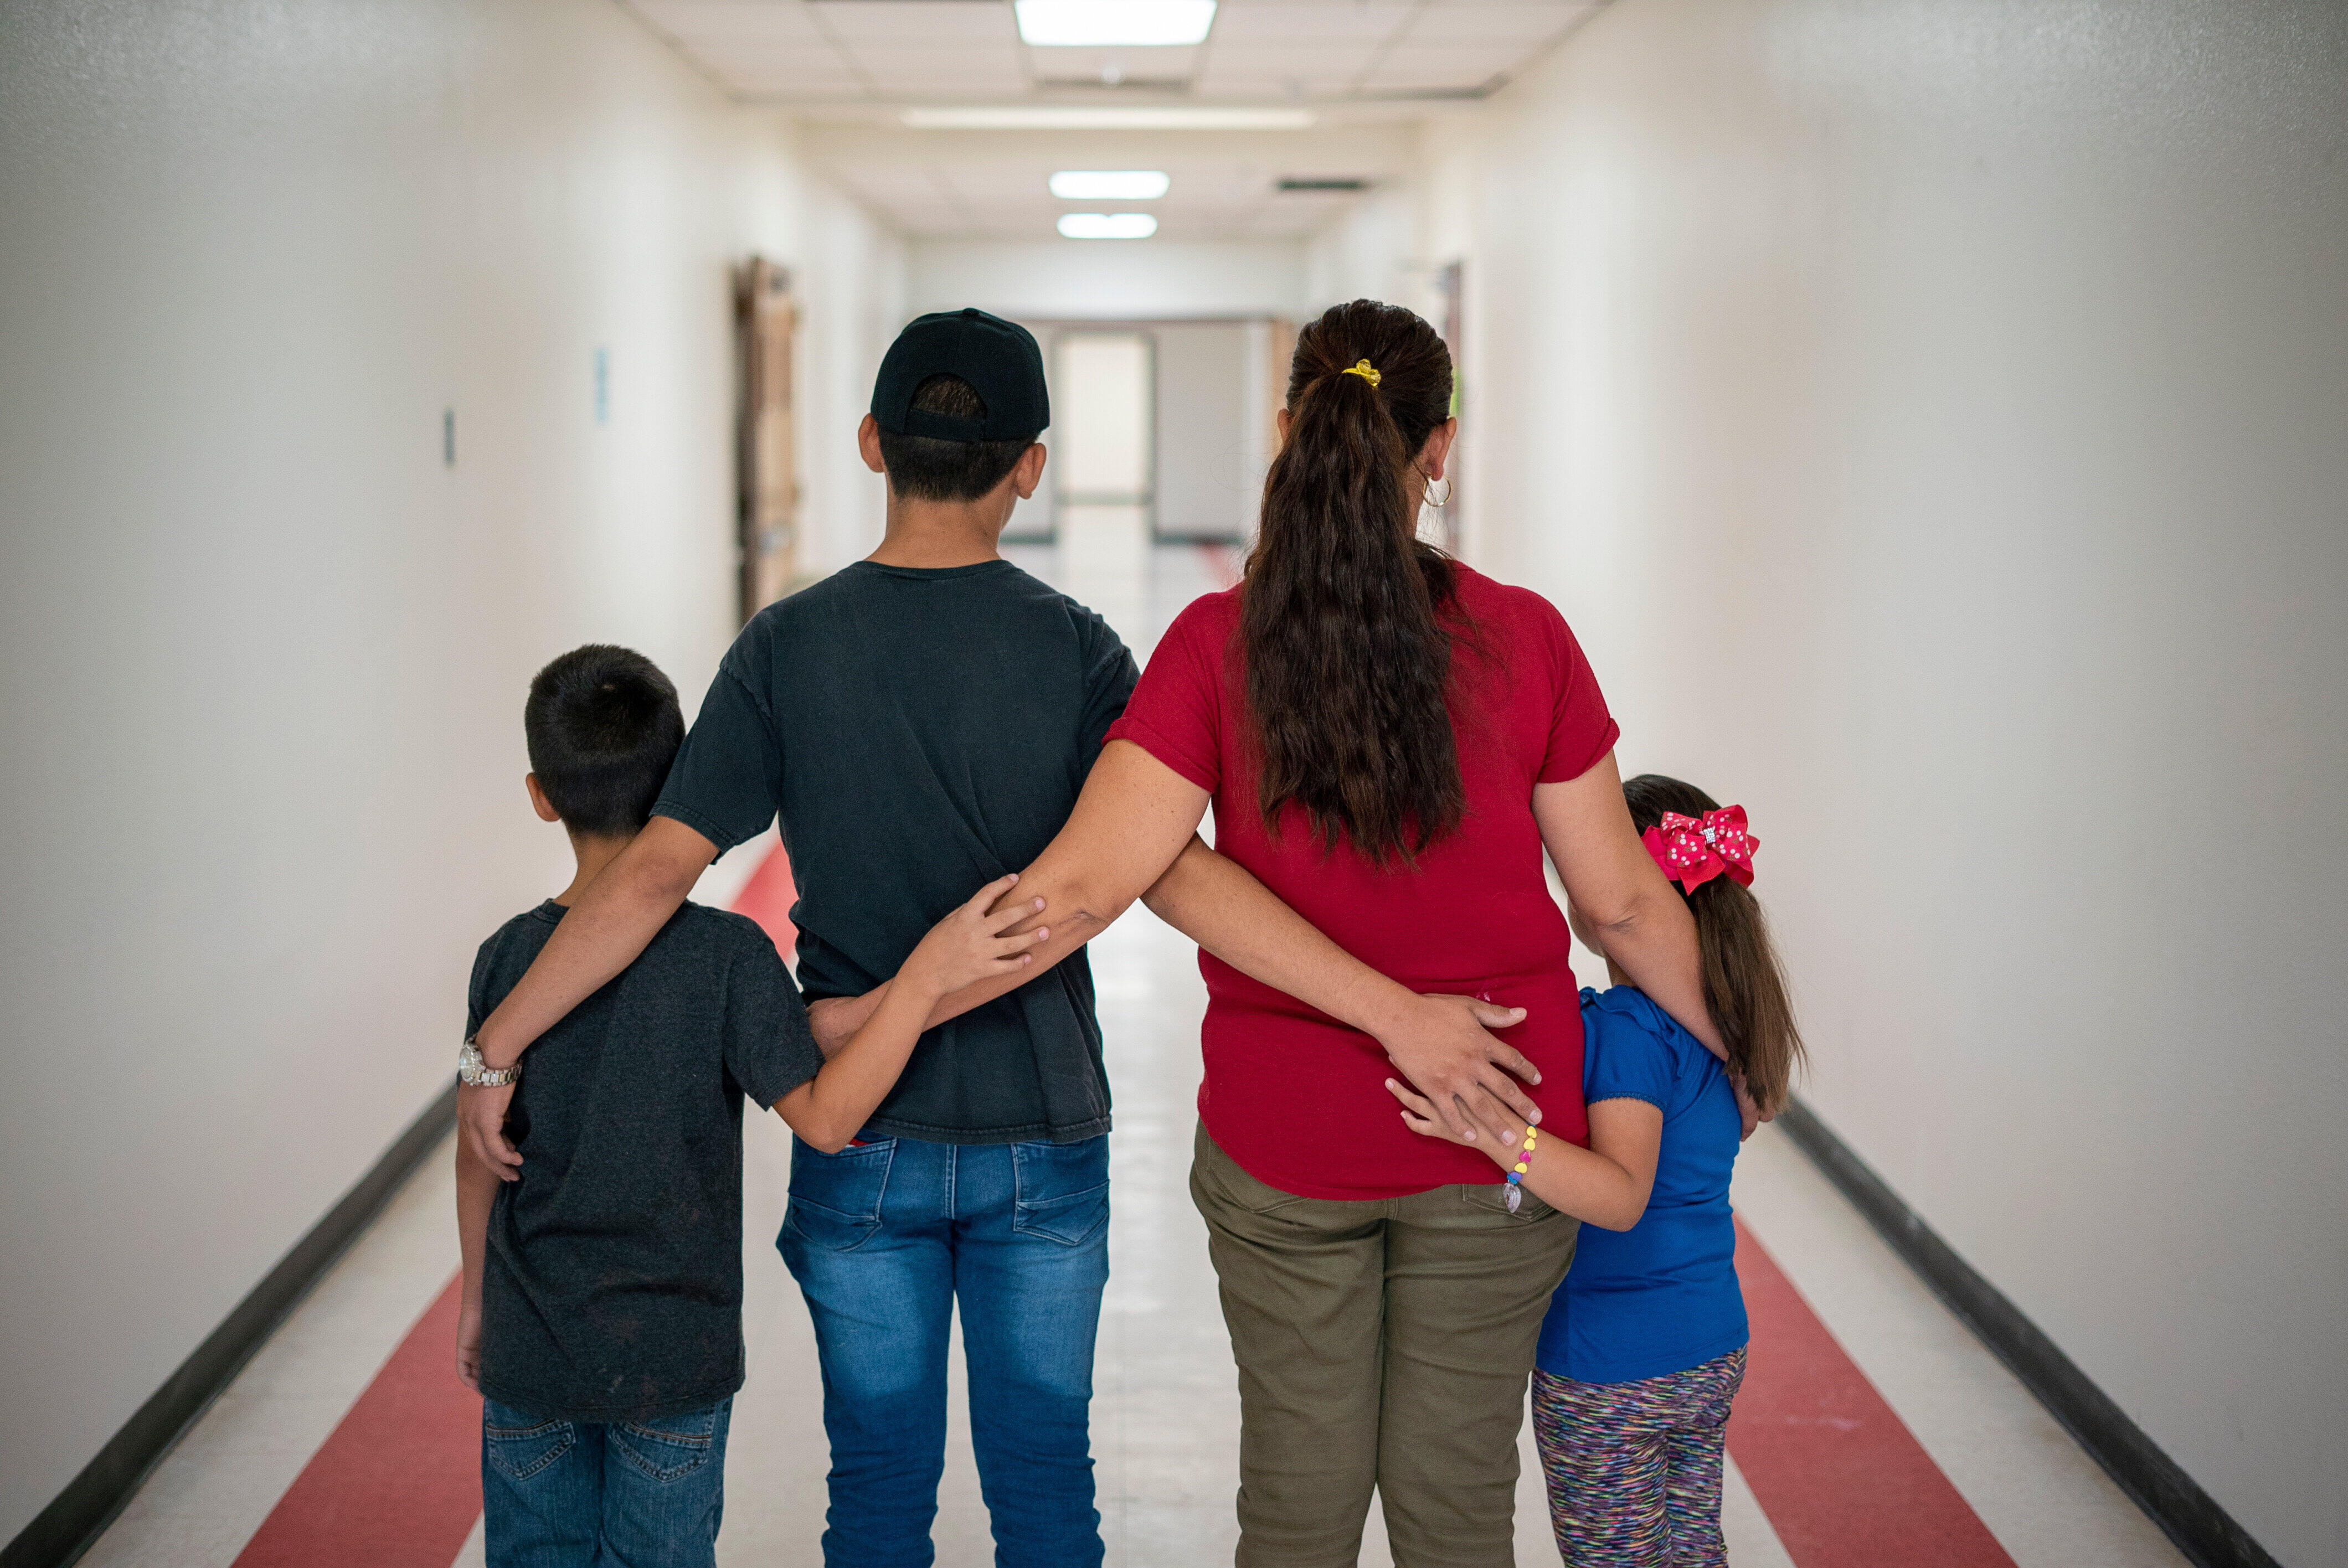 Luisa, an asylum seeker from Mexico, stands with with her children in Arizona after she was able to cross the US border. They are standing in a hallway with their backs to the camera, to protect their identities. 